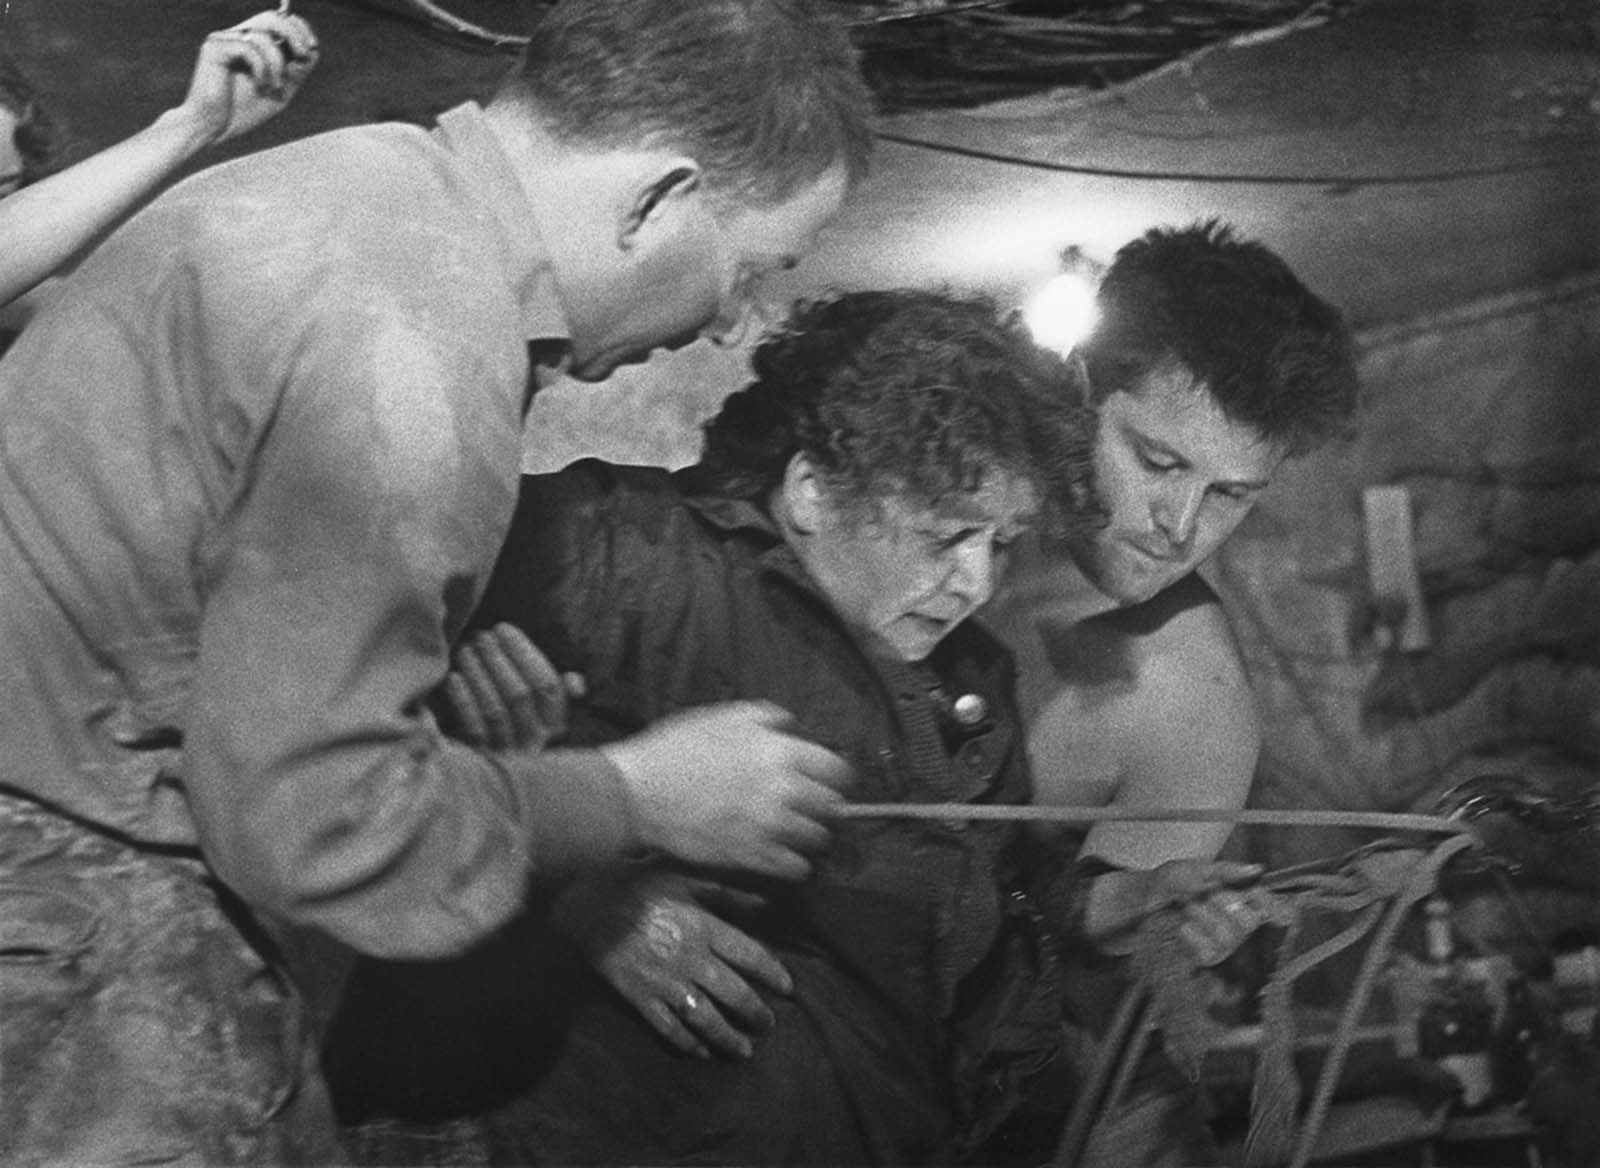 A 75-year-old woman is helped into Tunnel 57, through which 57 East Berlin citizens escaped to the western sector of the city on October 3 and 4, 1964.